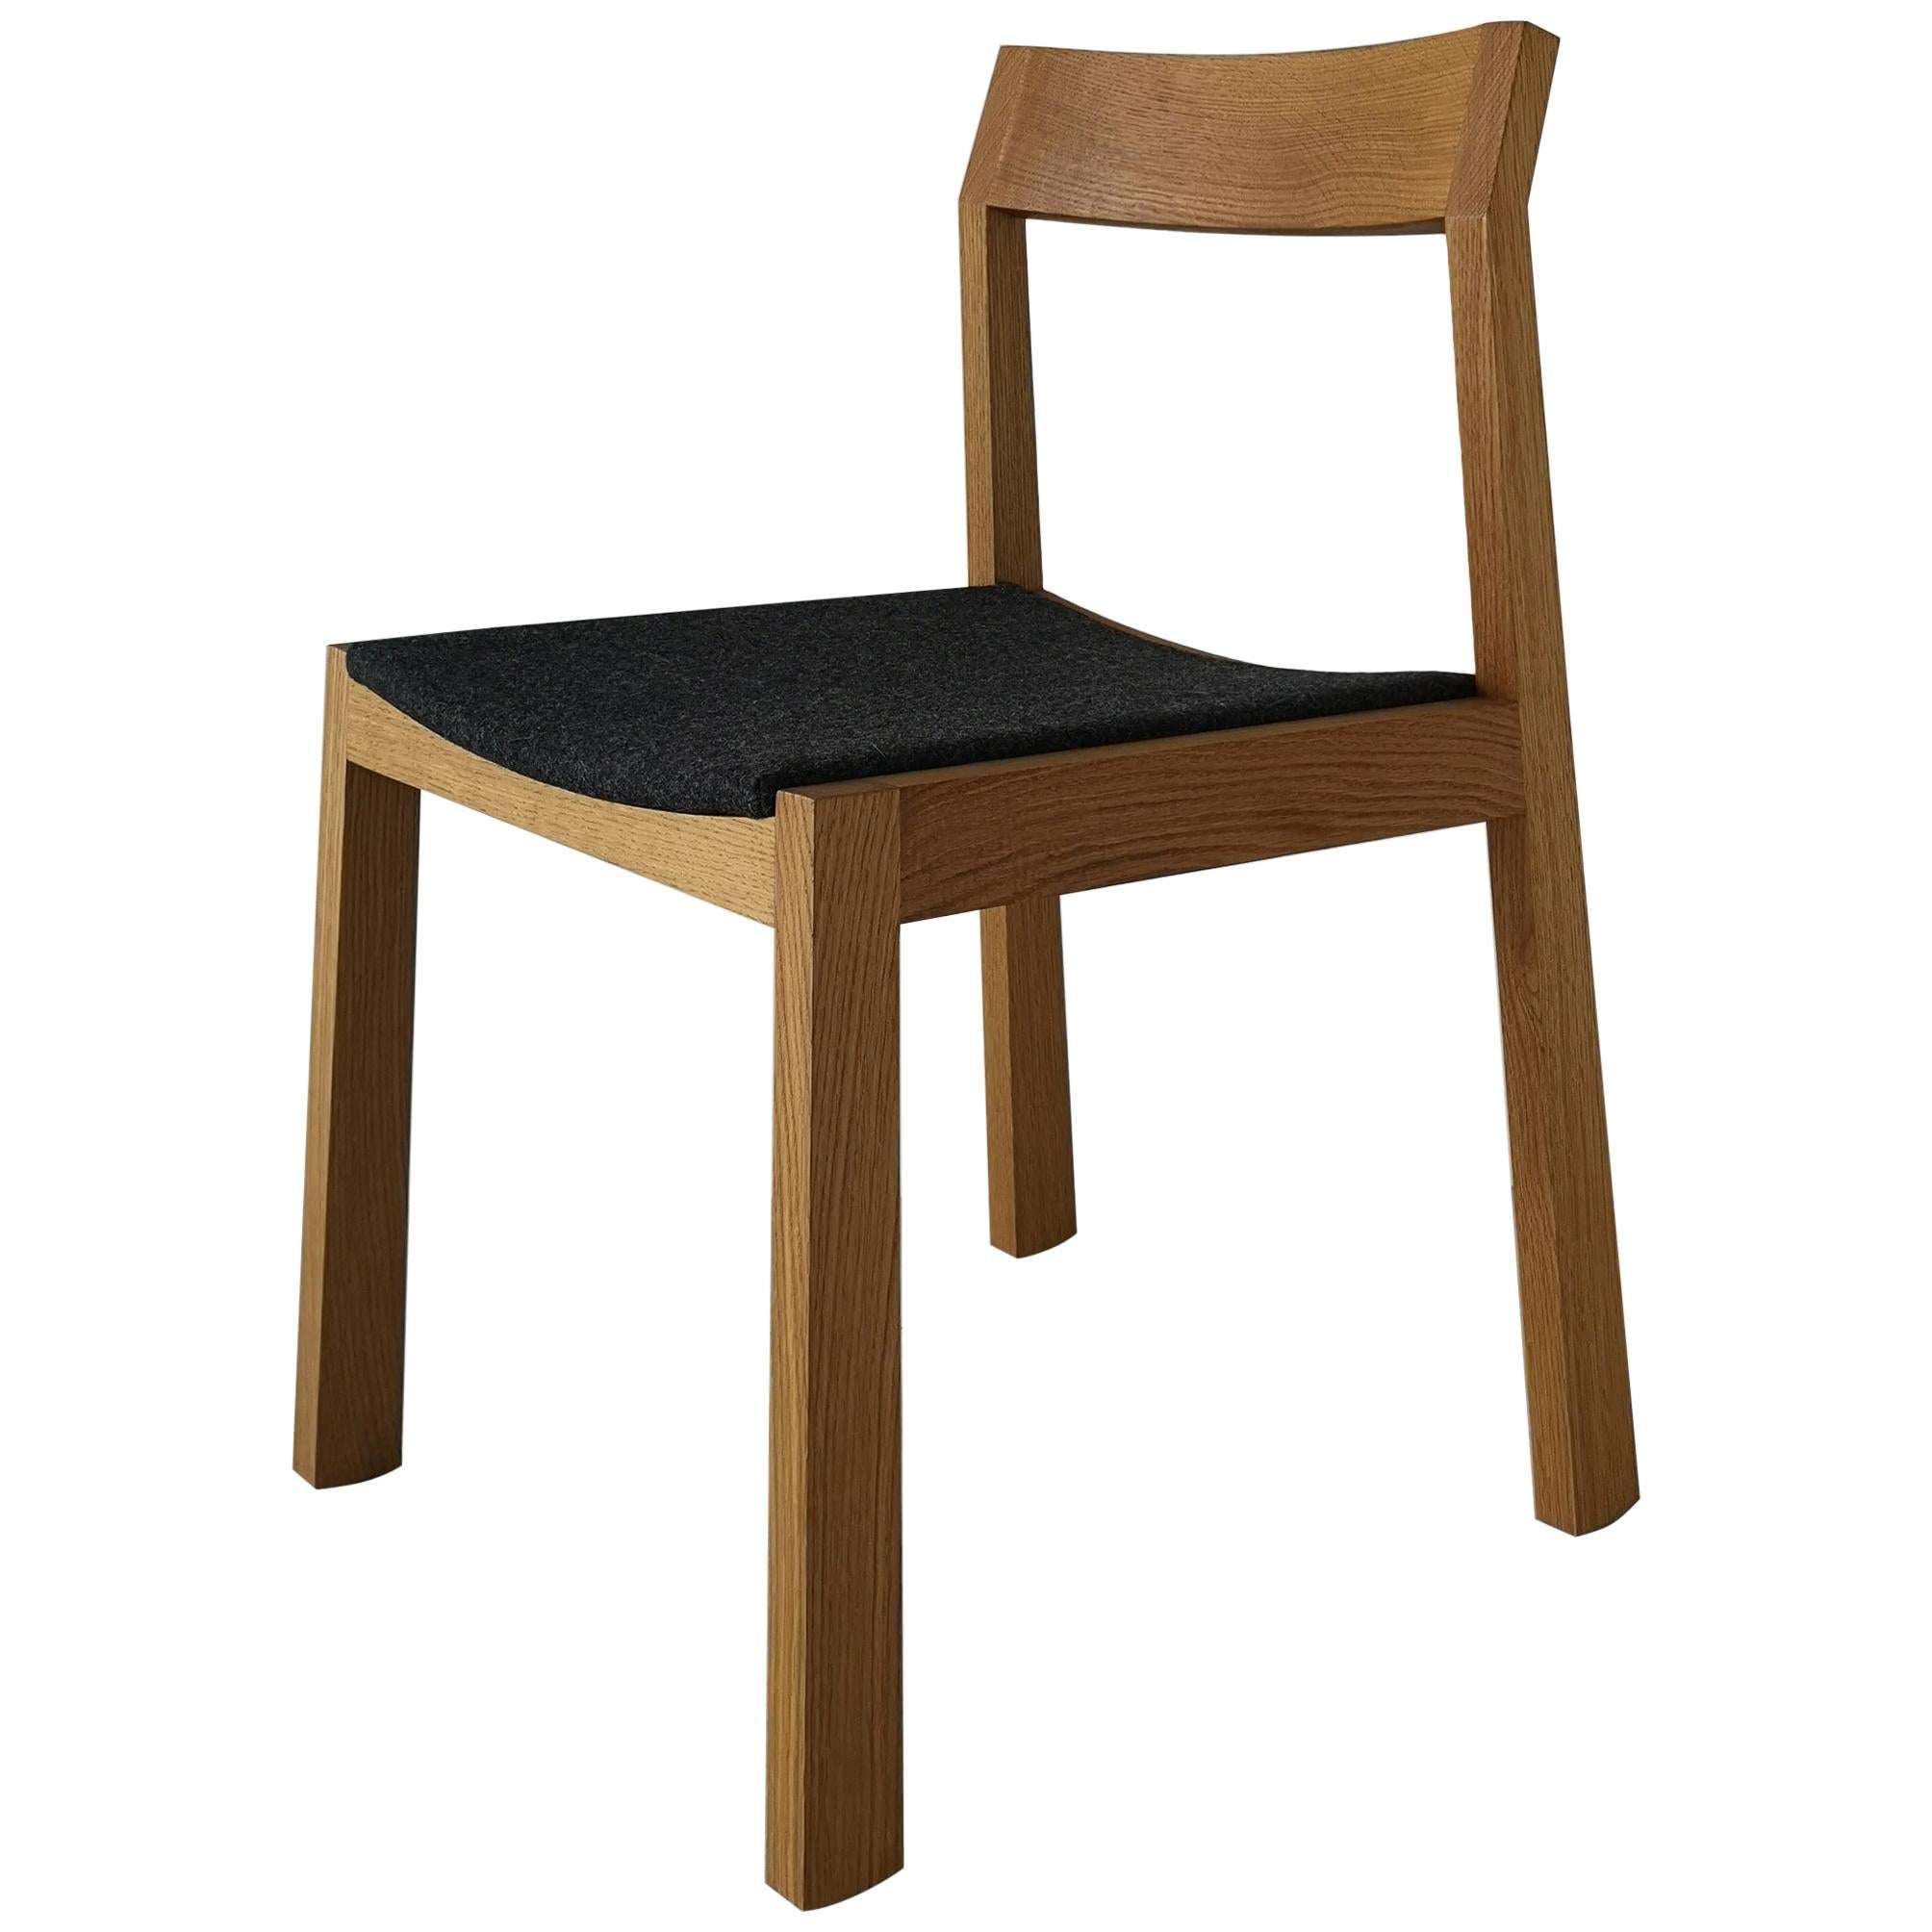 A+ Solid Hardwood Upholstered Dining Chair by Izm Design